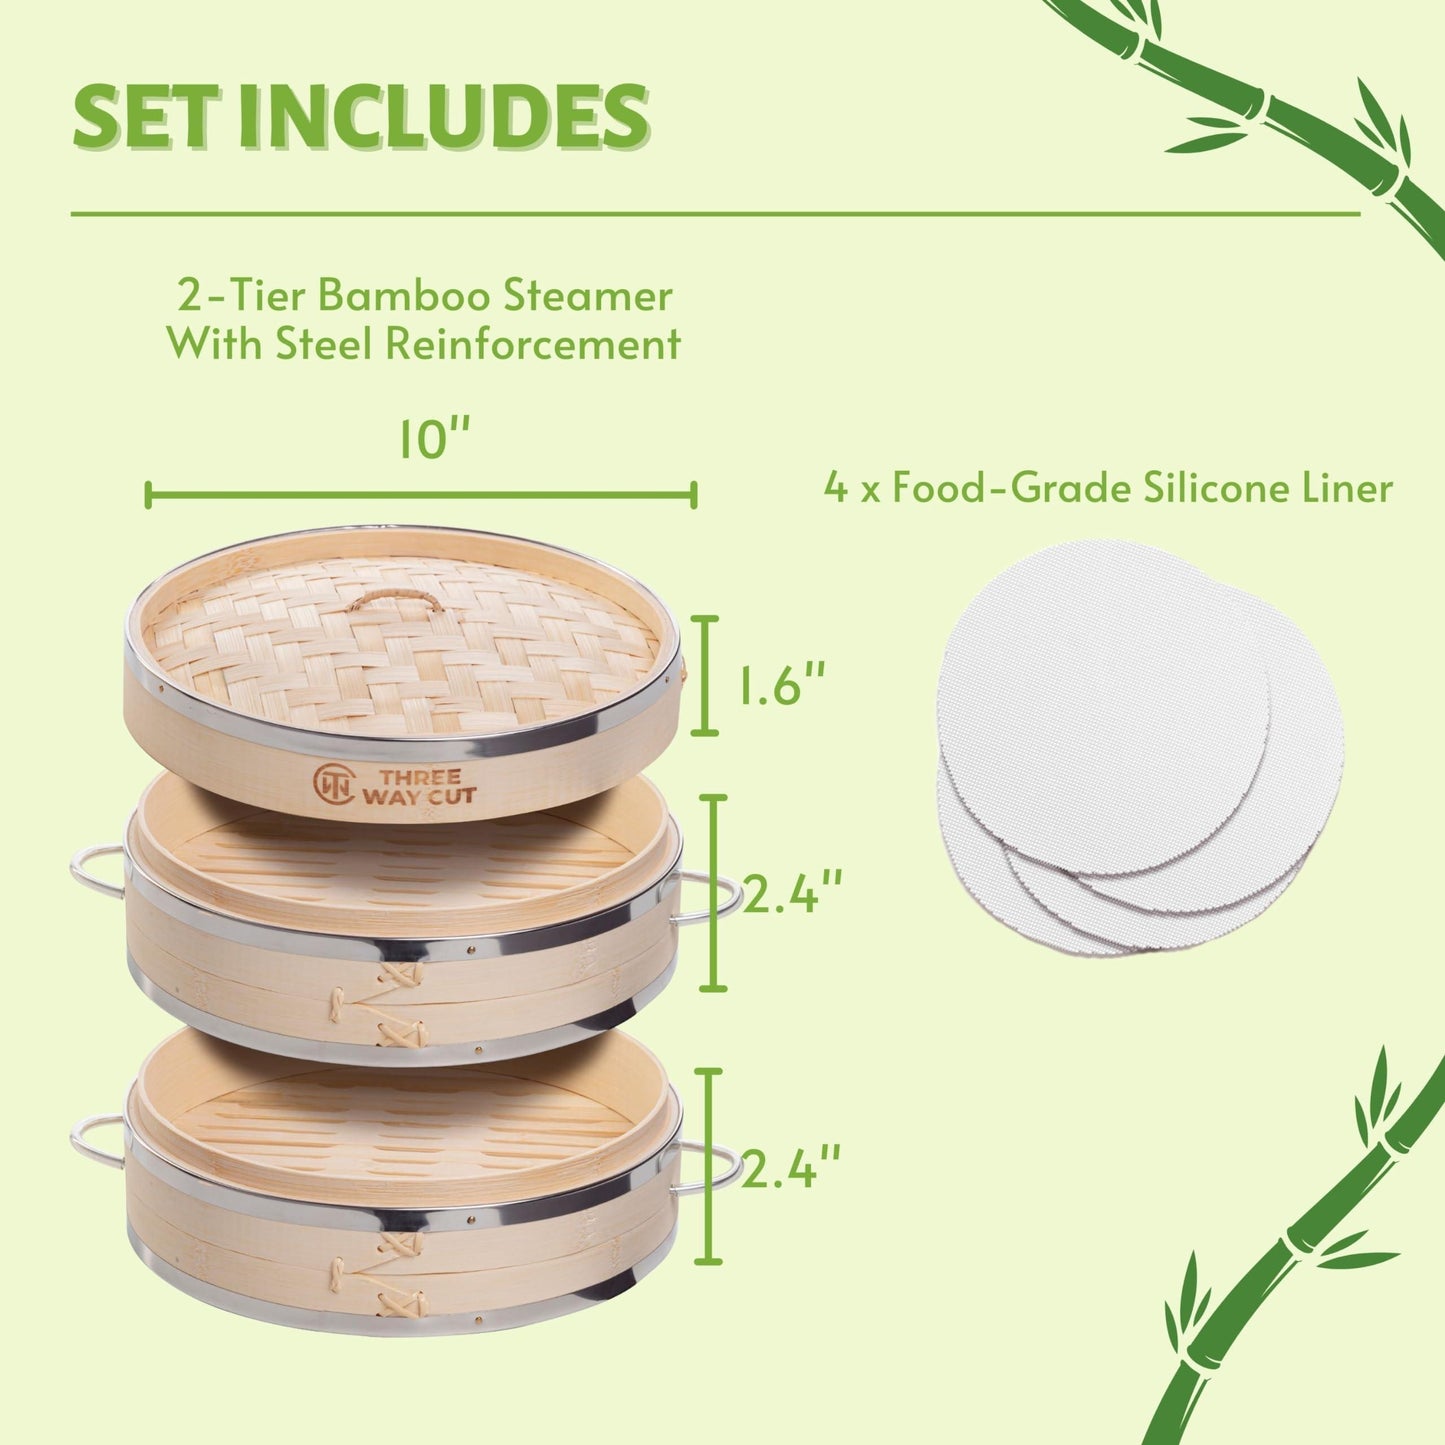 Dumpling Bamboo Steamer 10 Inch 2 Tier Wooden Basket With Handle, Reusable Silicone Liner, Kit For Cooking Baby Bao Bun, Dim Sum, Rice Potsticker Steaming Chinese Asian Food & Vegetables - CookCave